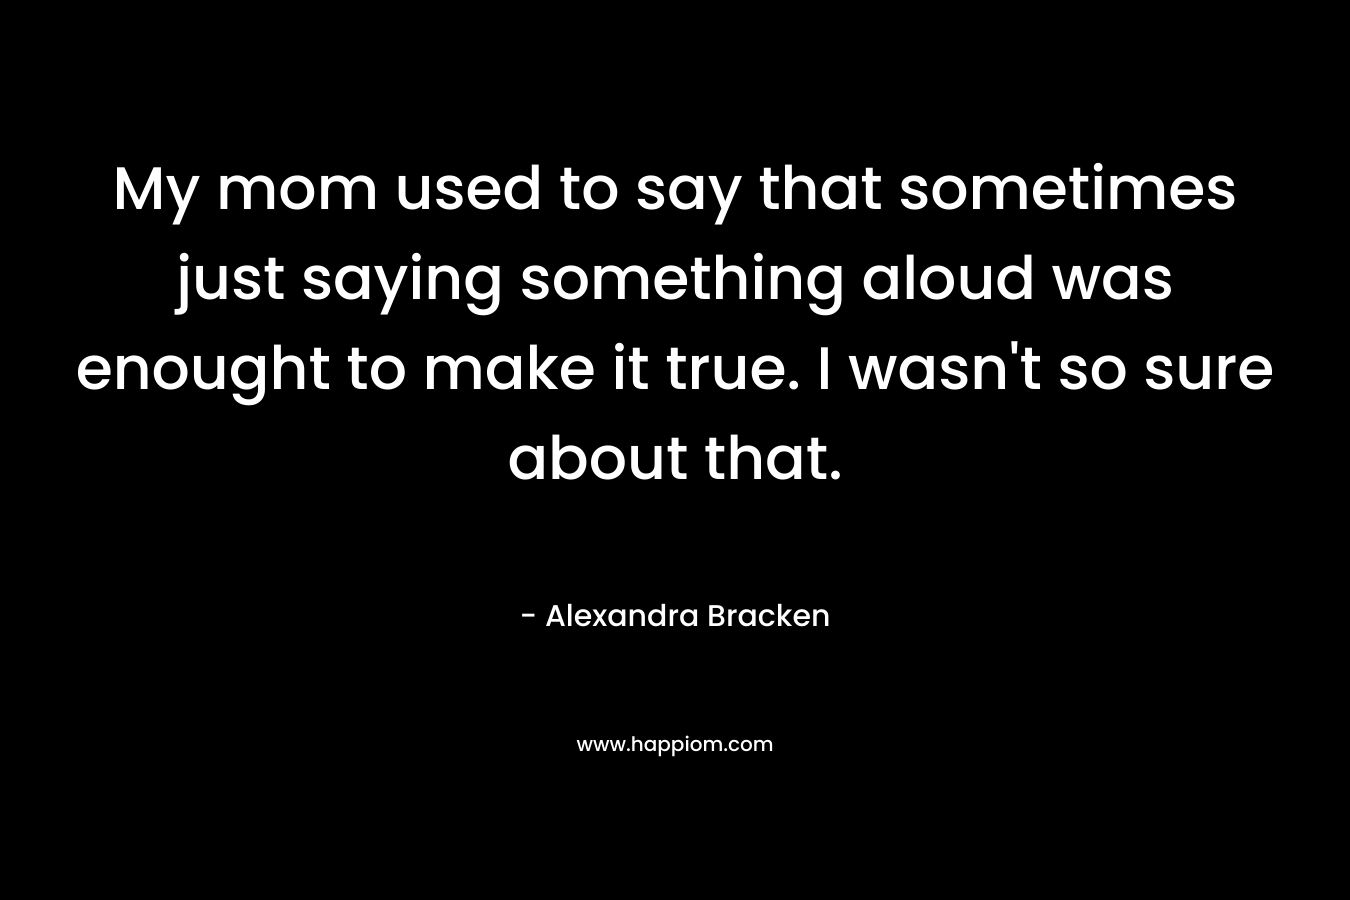 My mom used to say that sometimes just saying something aloud was enought to make it true. I wasn’t so sure about that. – Alexandra Bracken